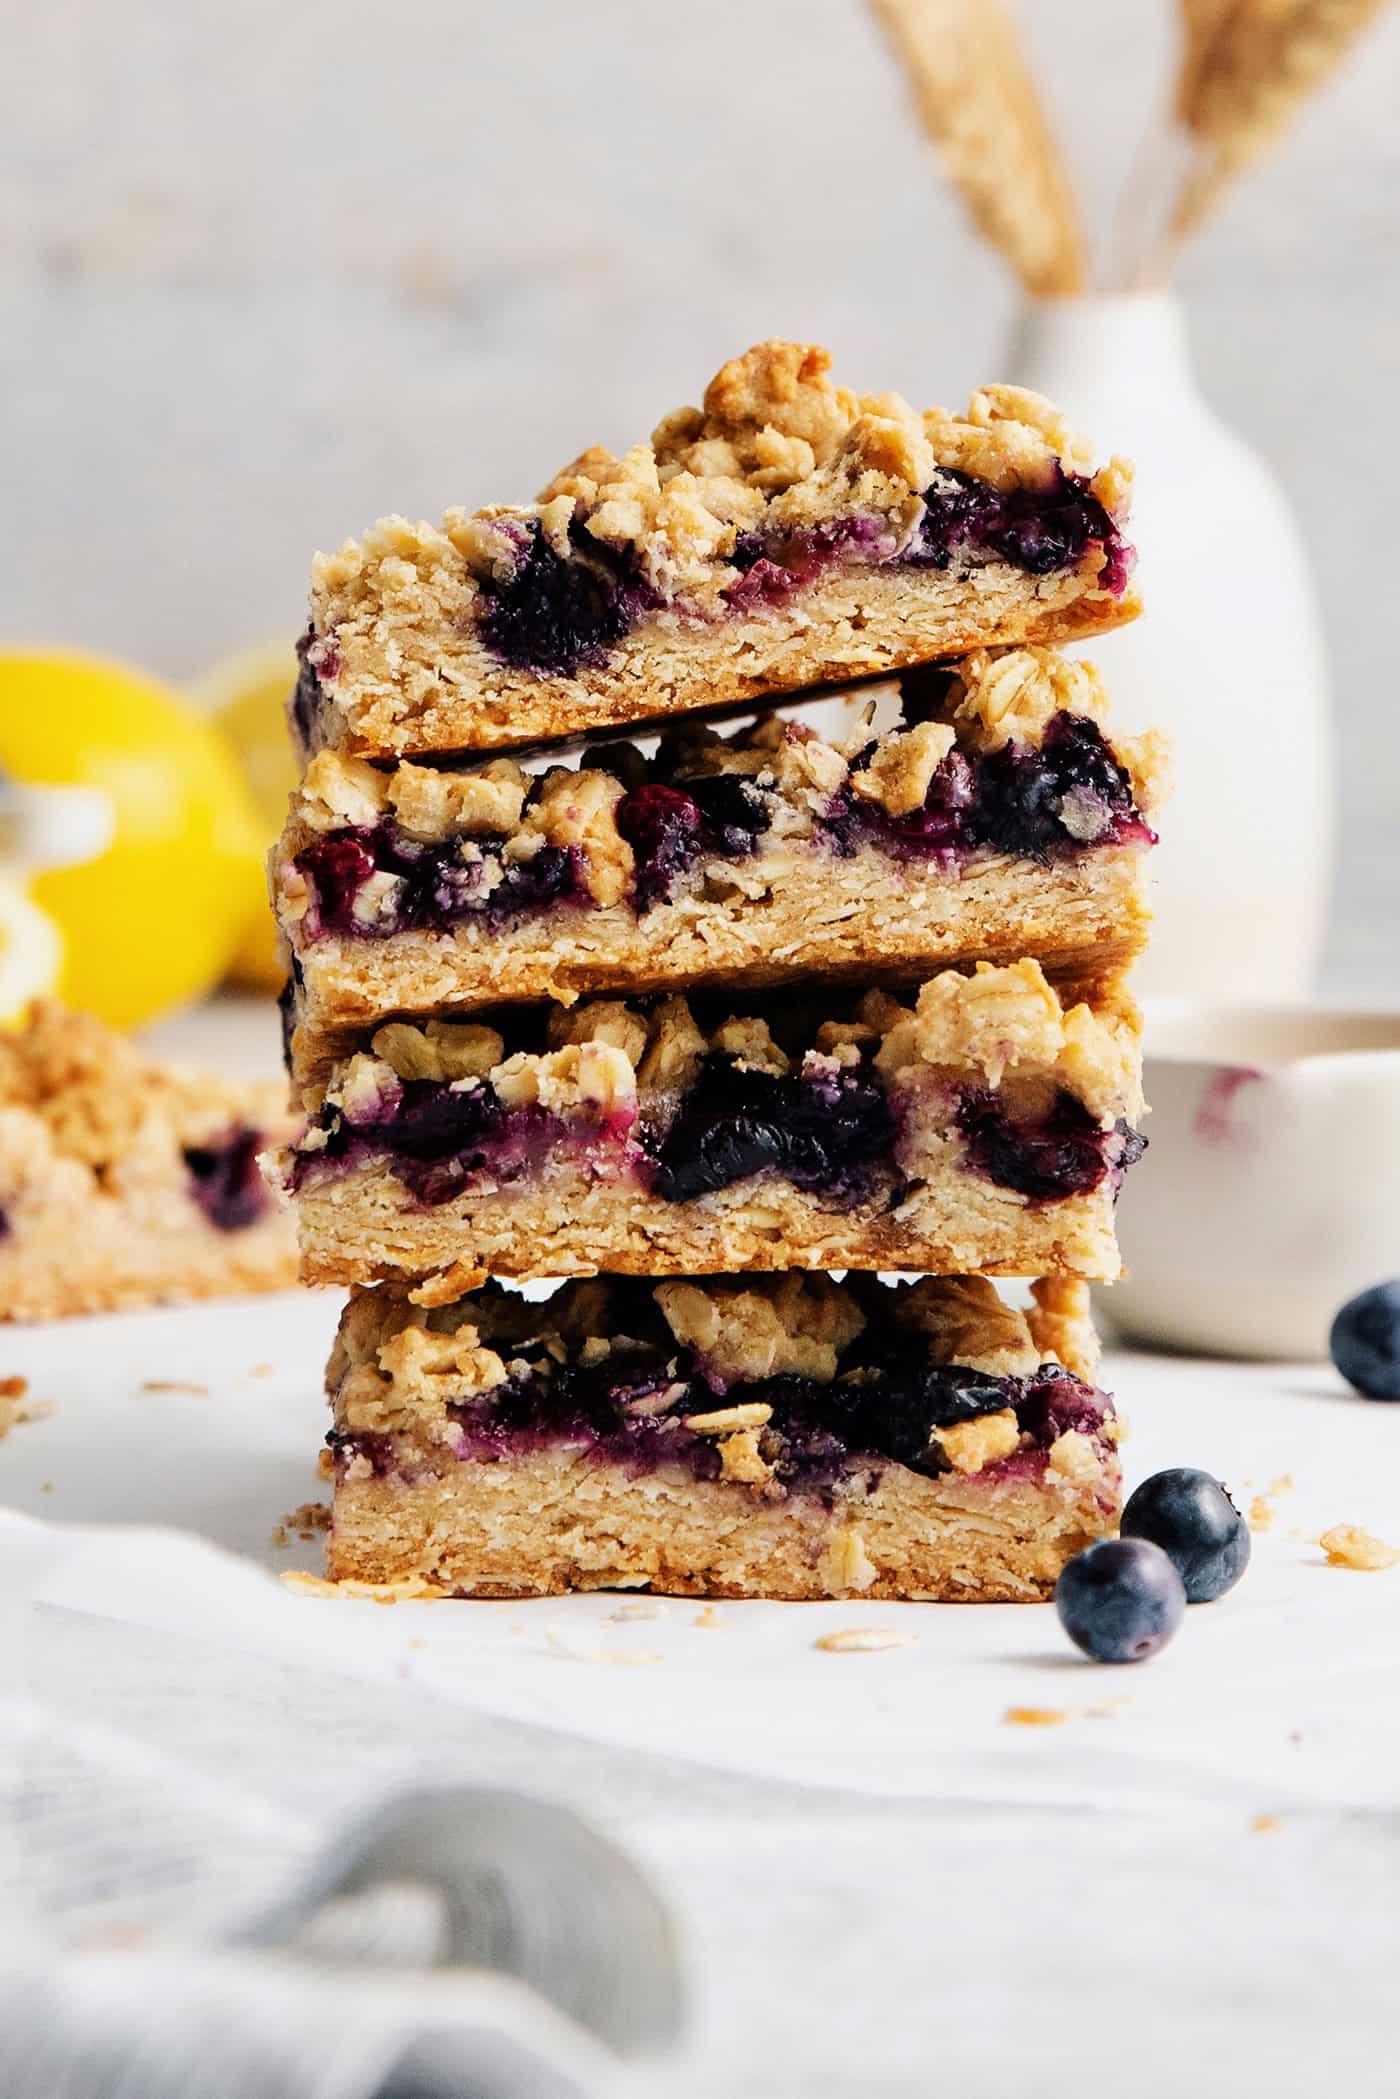 A stack of four blueberry crumble bars.